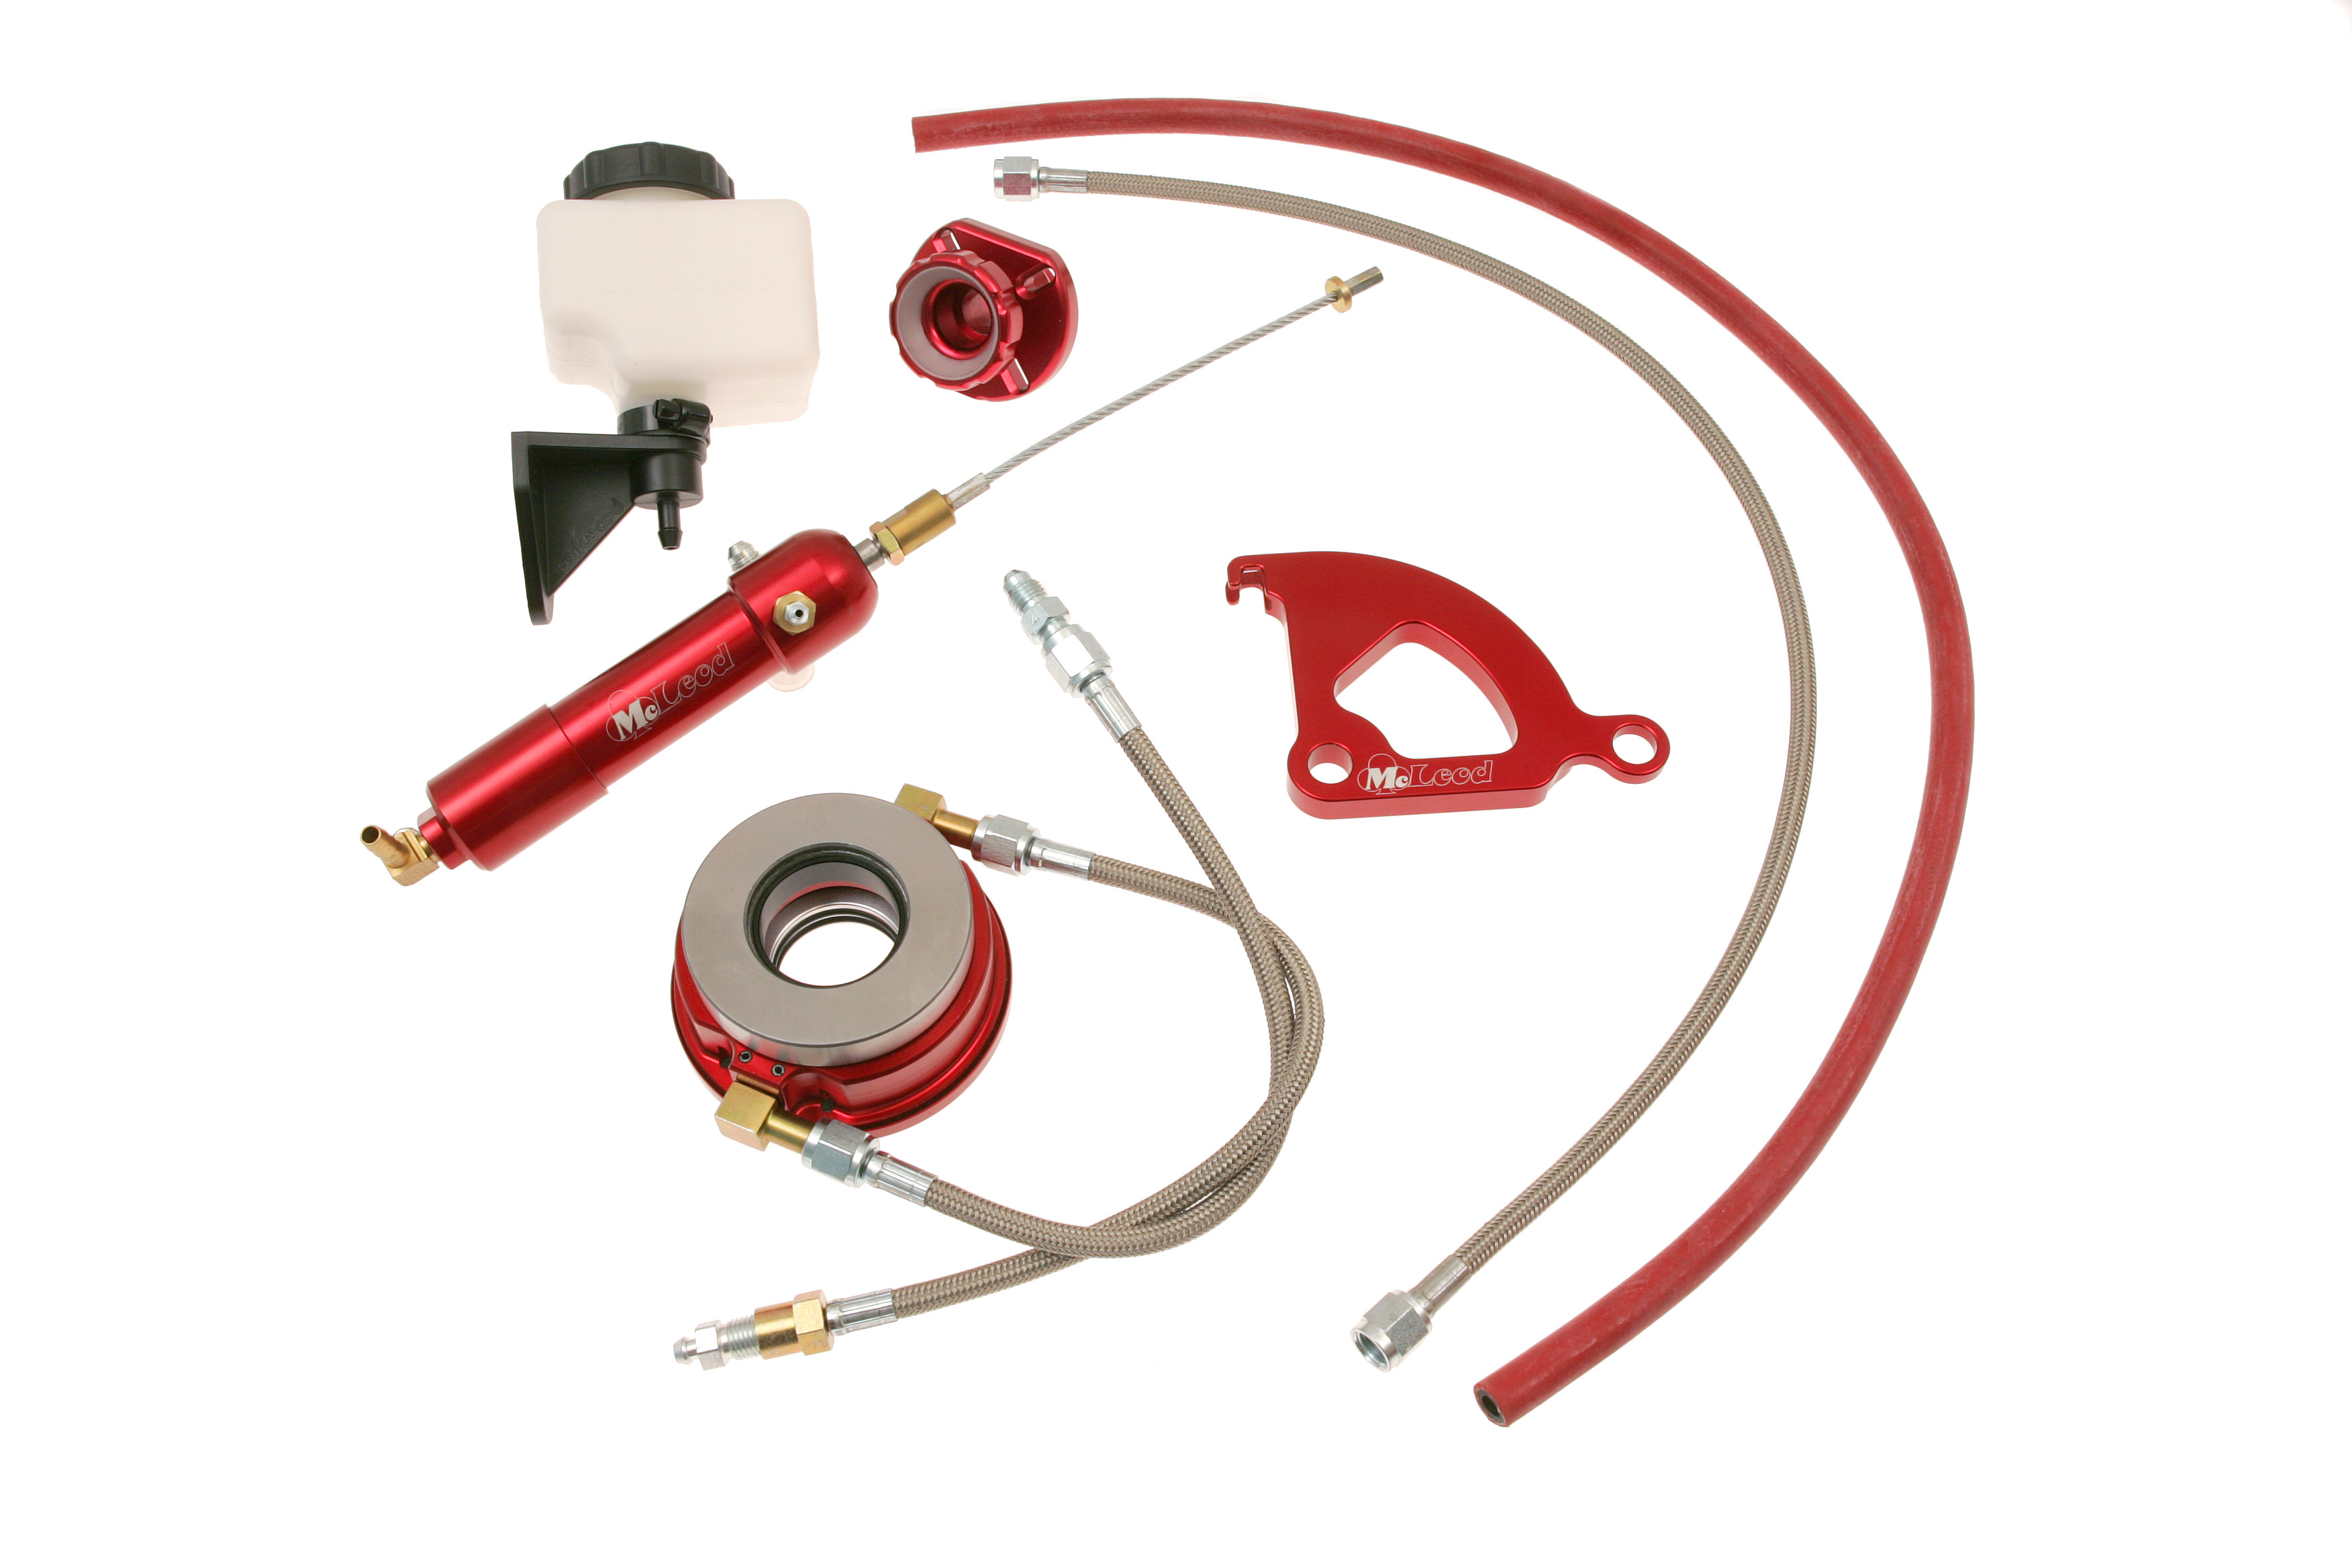 McLeod 14-325 Hydraulic T.O. Brg Kit for 79-04 Mustang - Click Image to Close